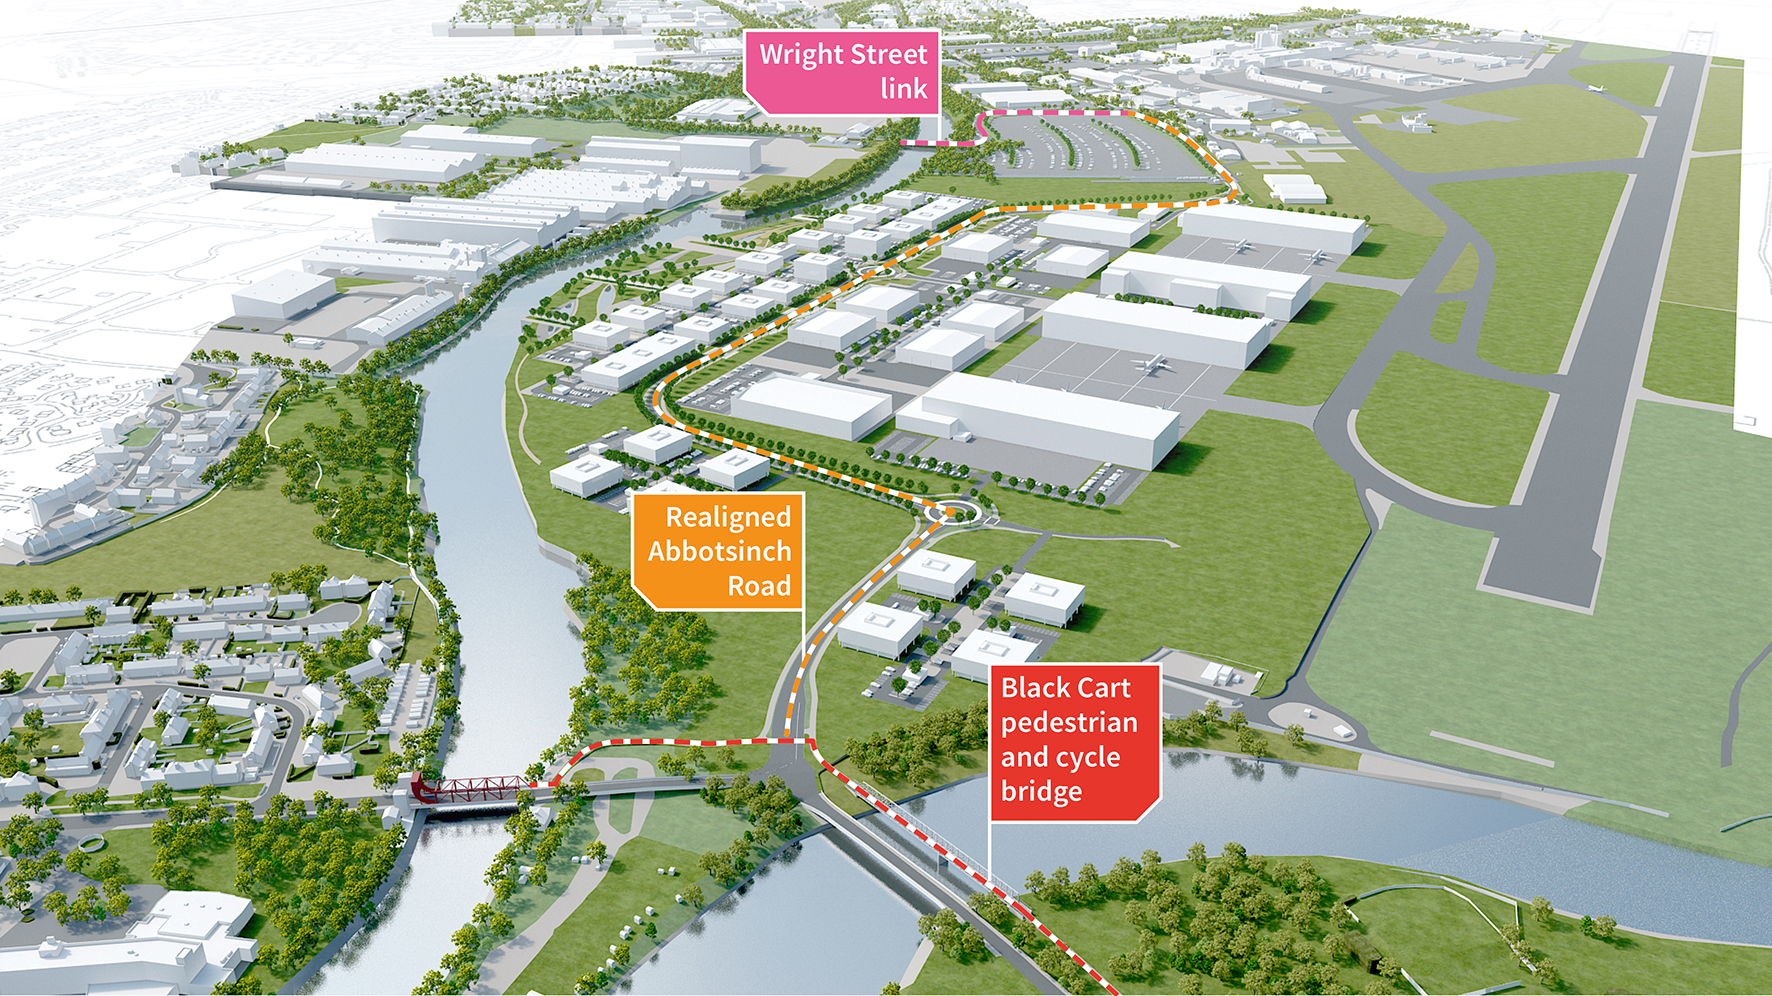 Renfrewshire innovation district connections contract approved